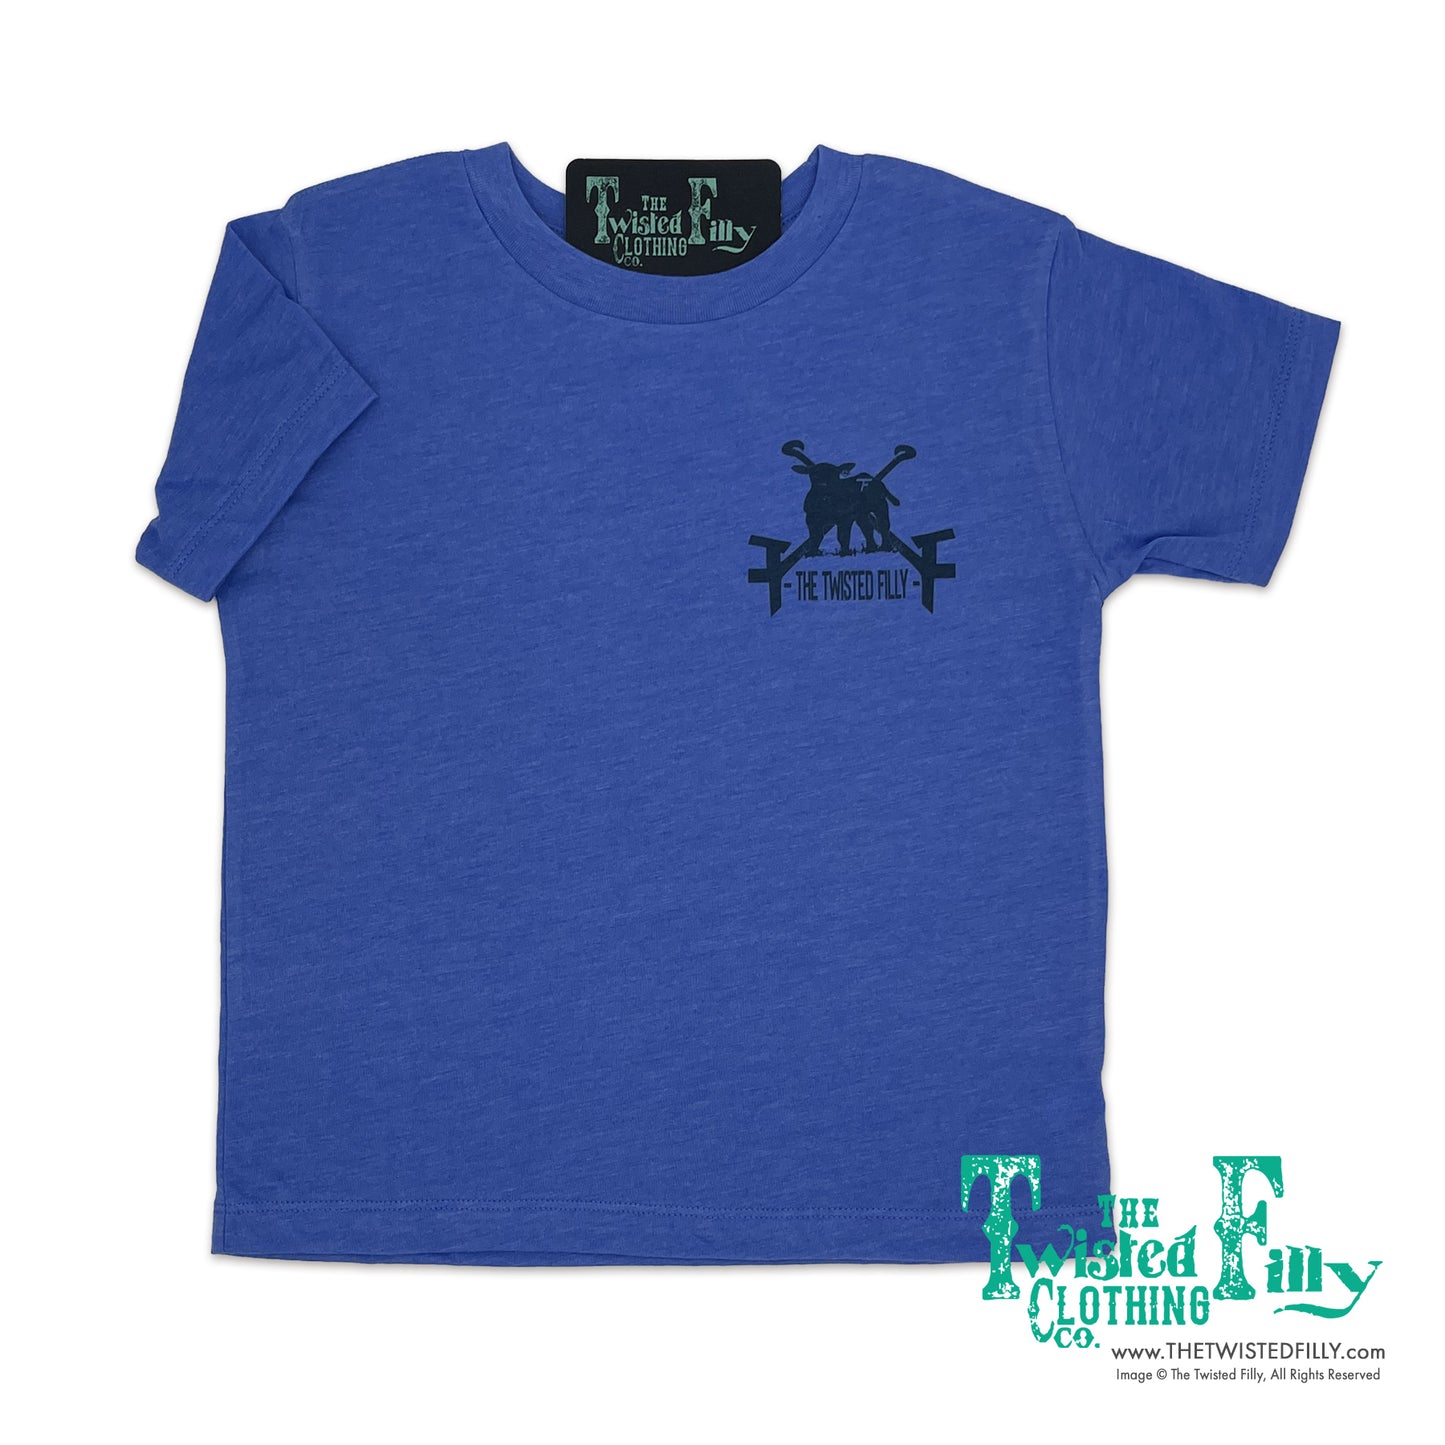 Brand Yer Weaners - S/S Youth Tee - Assorted Colors